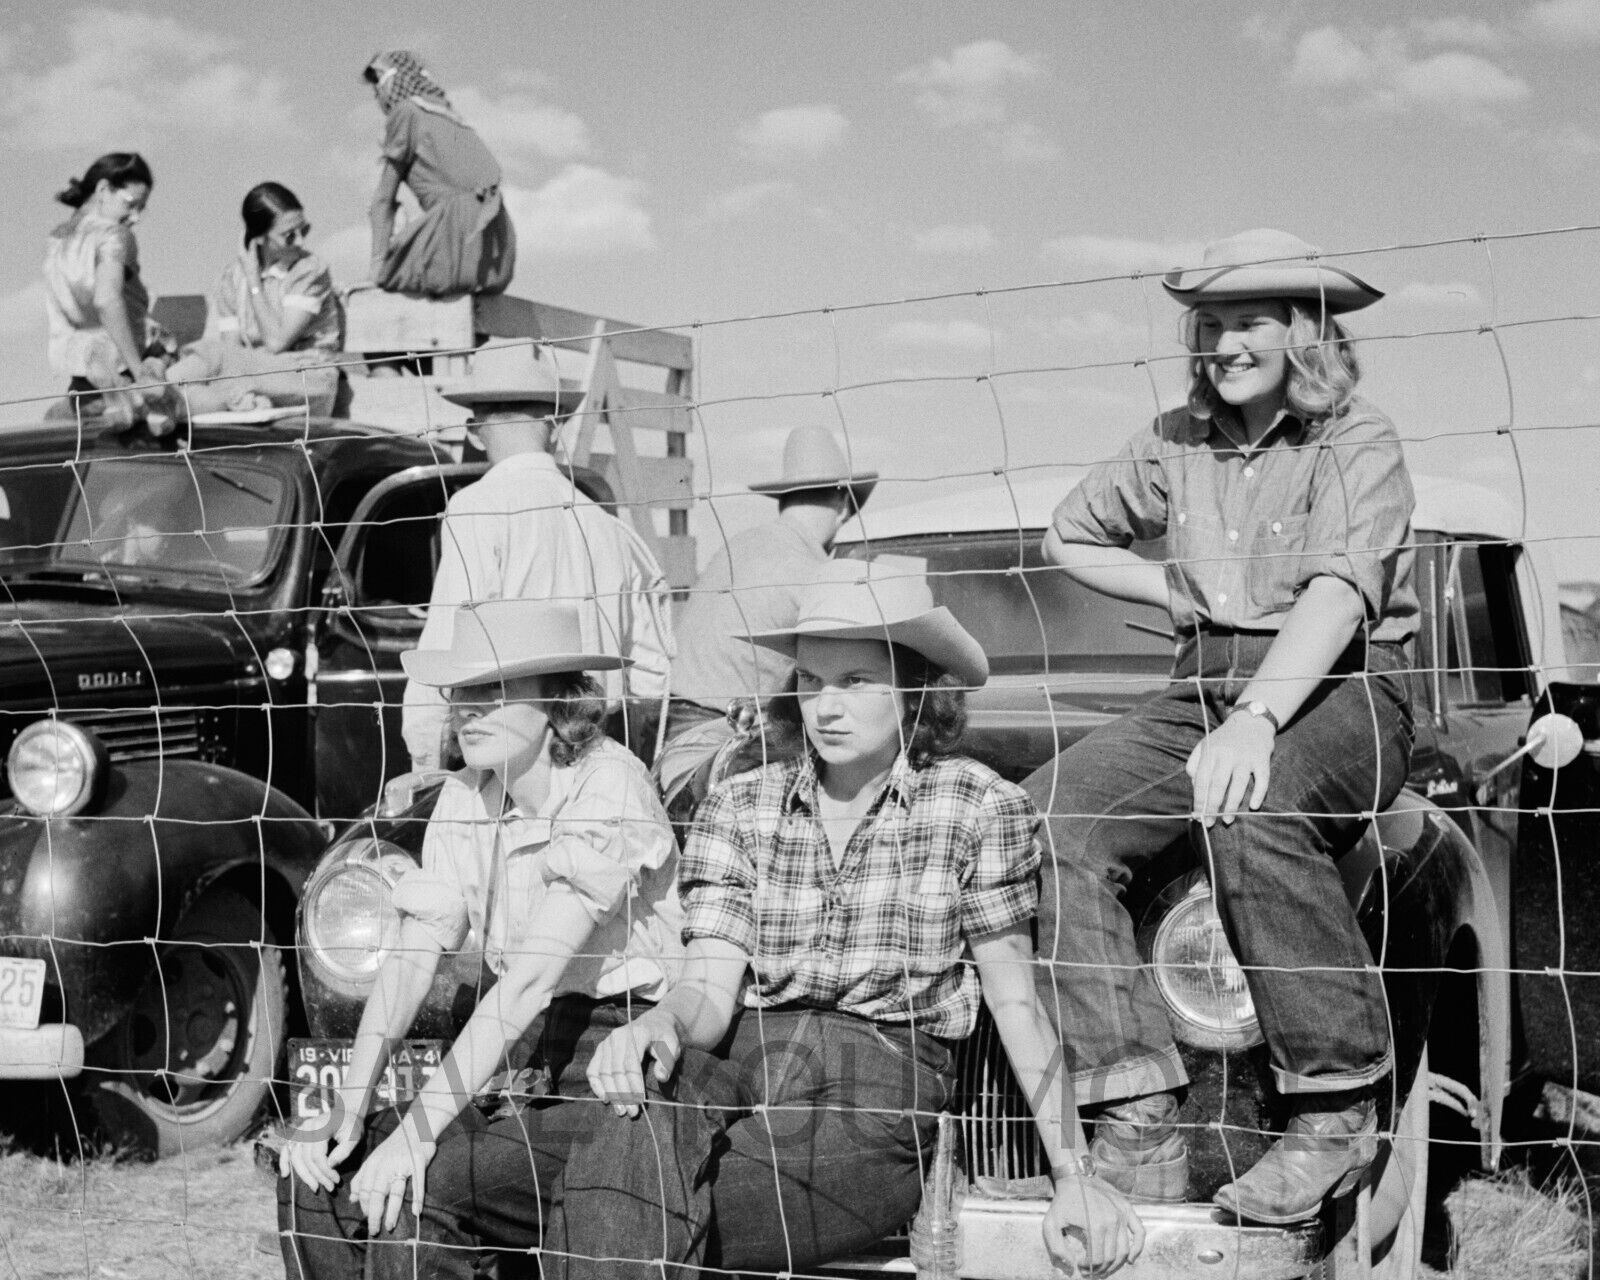 Photograph Vintage Cowgirls At Rodeo Western Life Ranch Montana 1930s 8x10